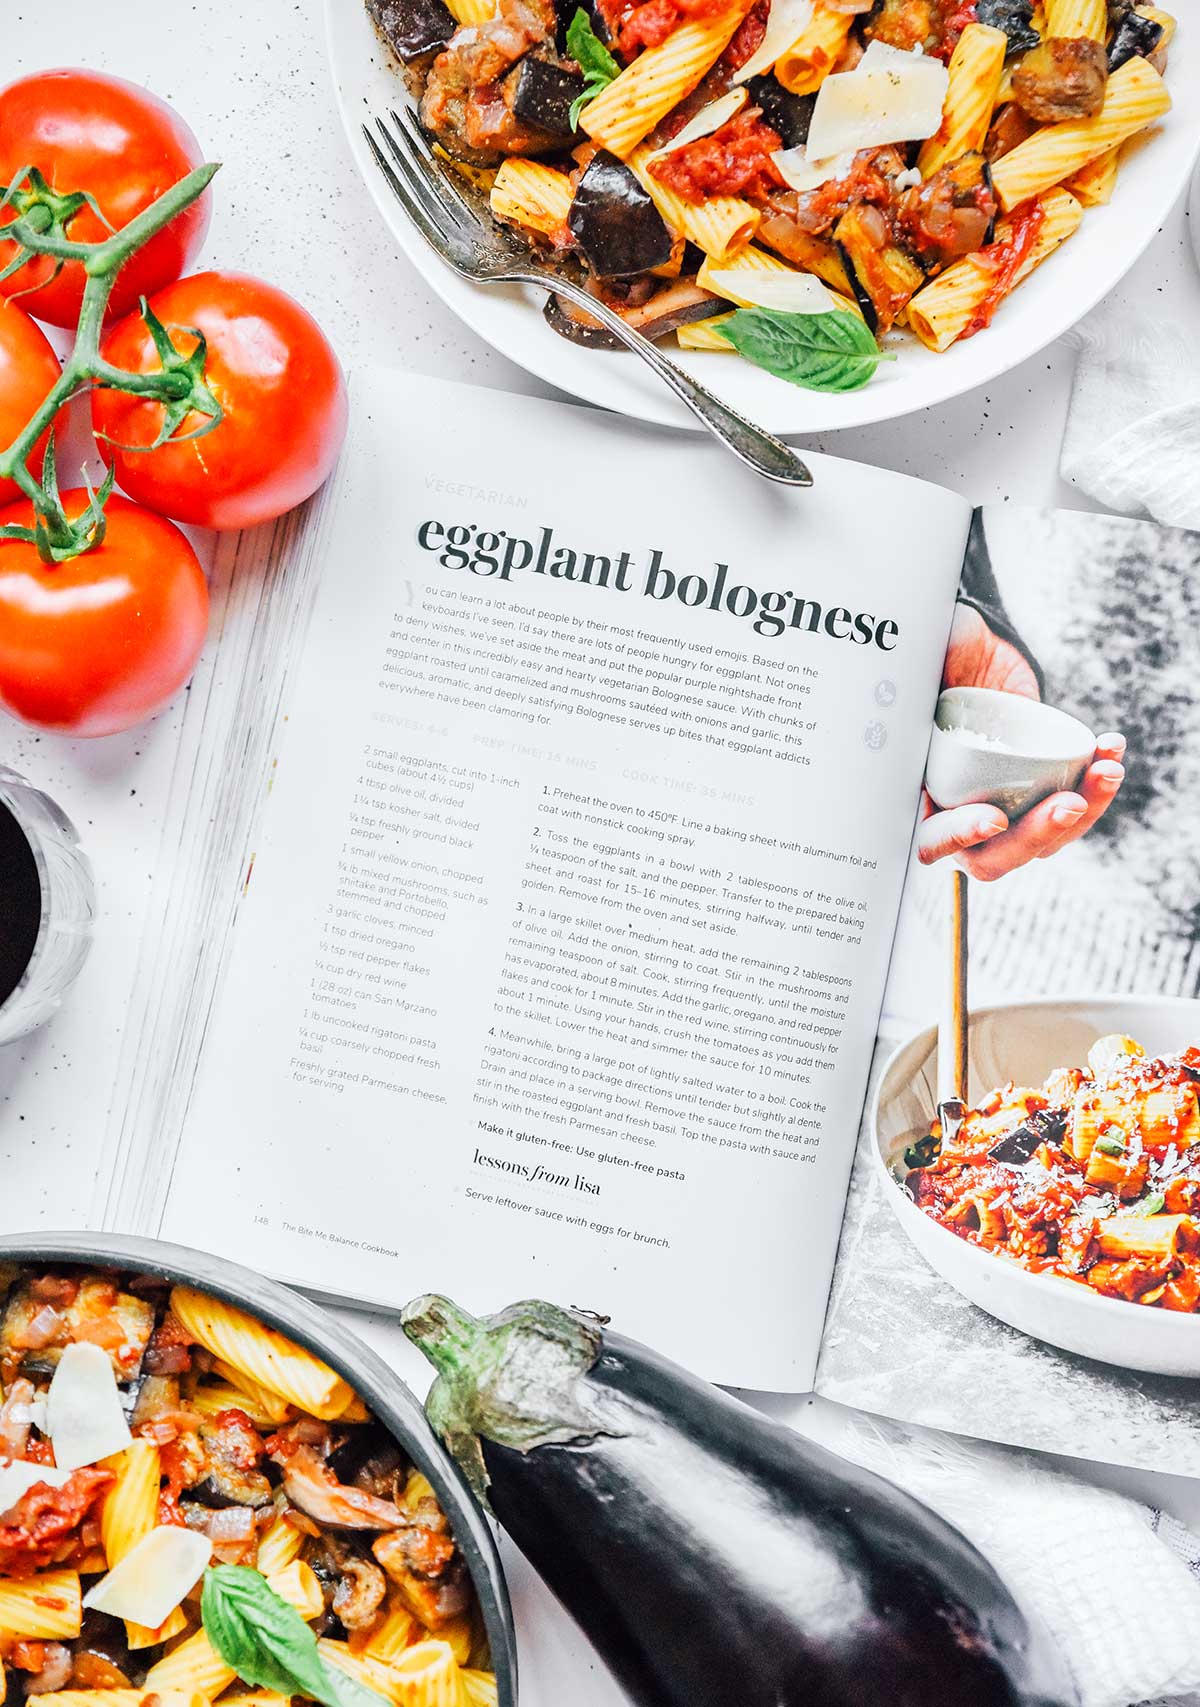 "The Bite Me Balance Cookbook" opened to the Eggplant Bolognese page, surrounded by the completed dish and a few tomatoes